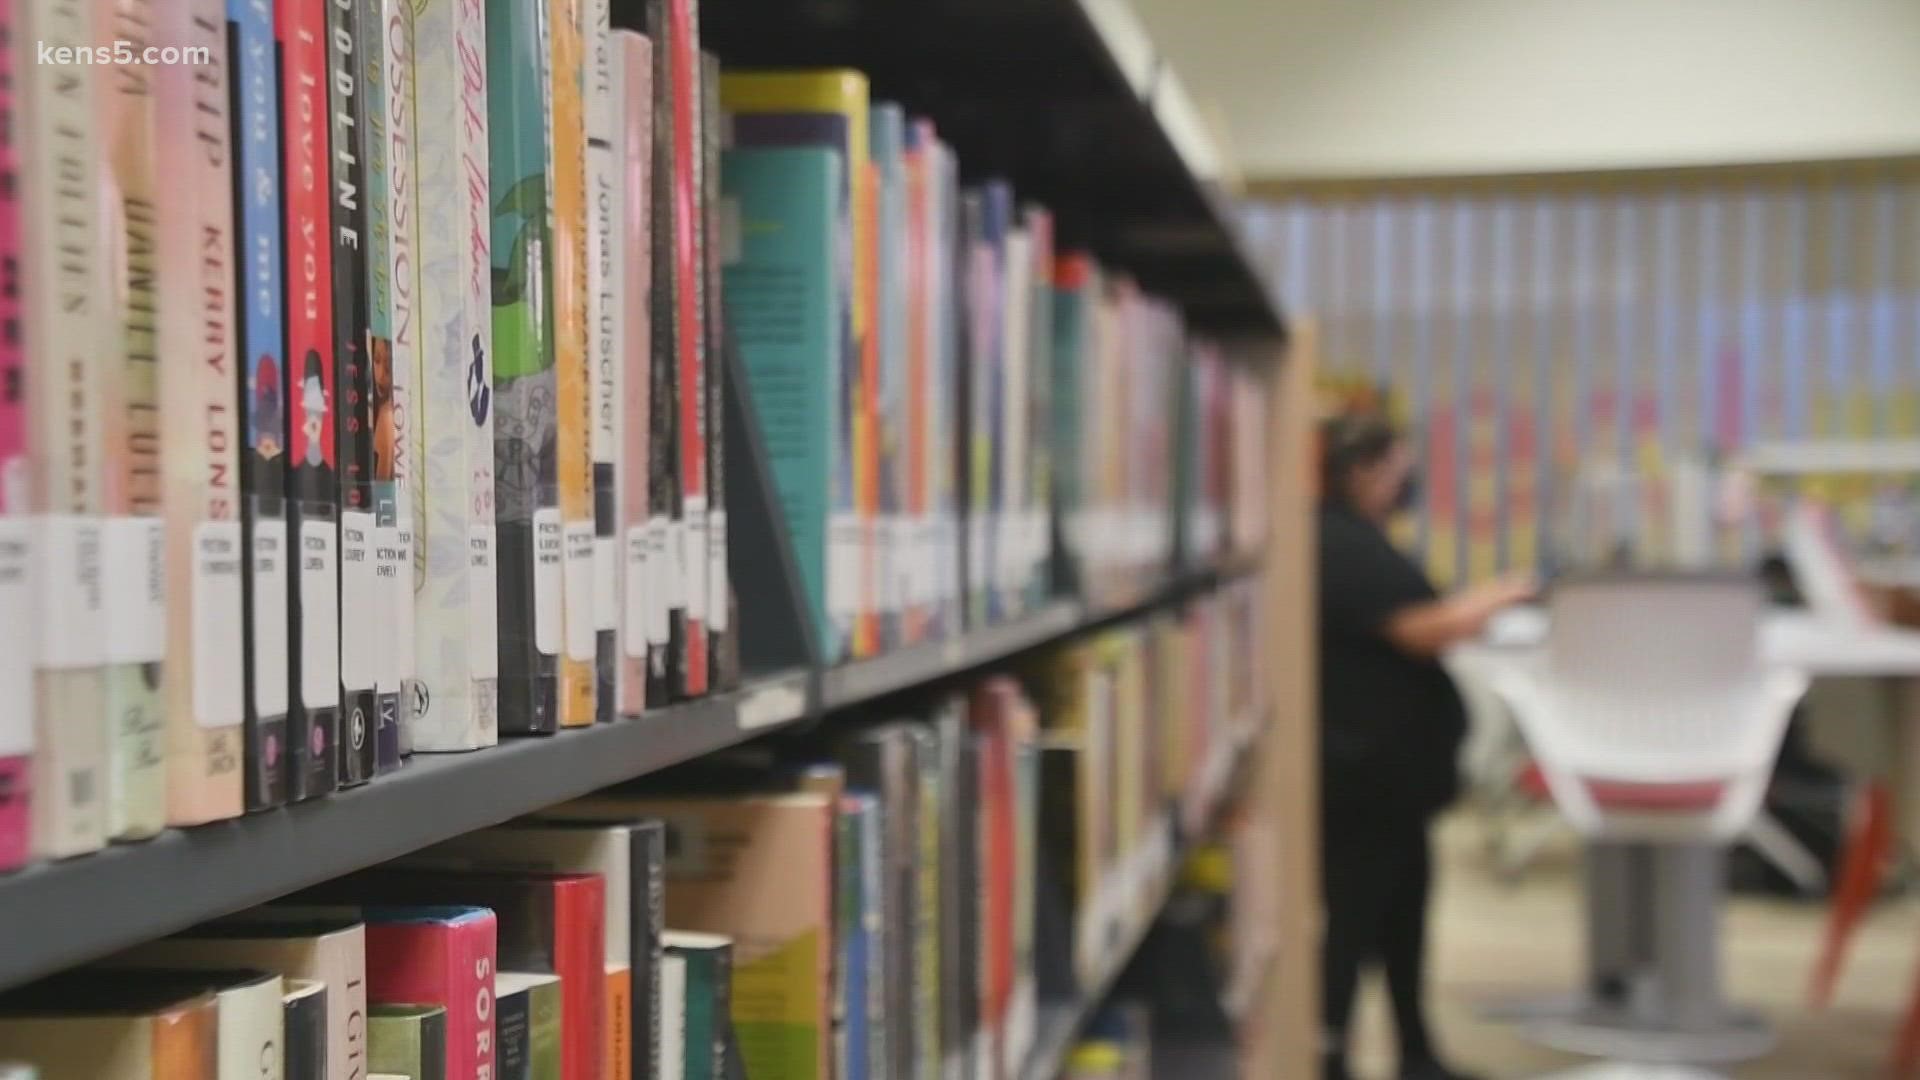 The San Antonio Public Library is discontinuing overdue fines starting Oct. 1.